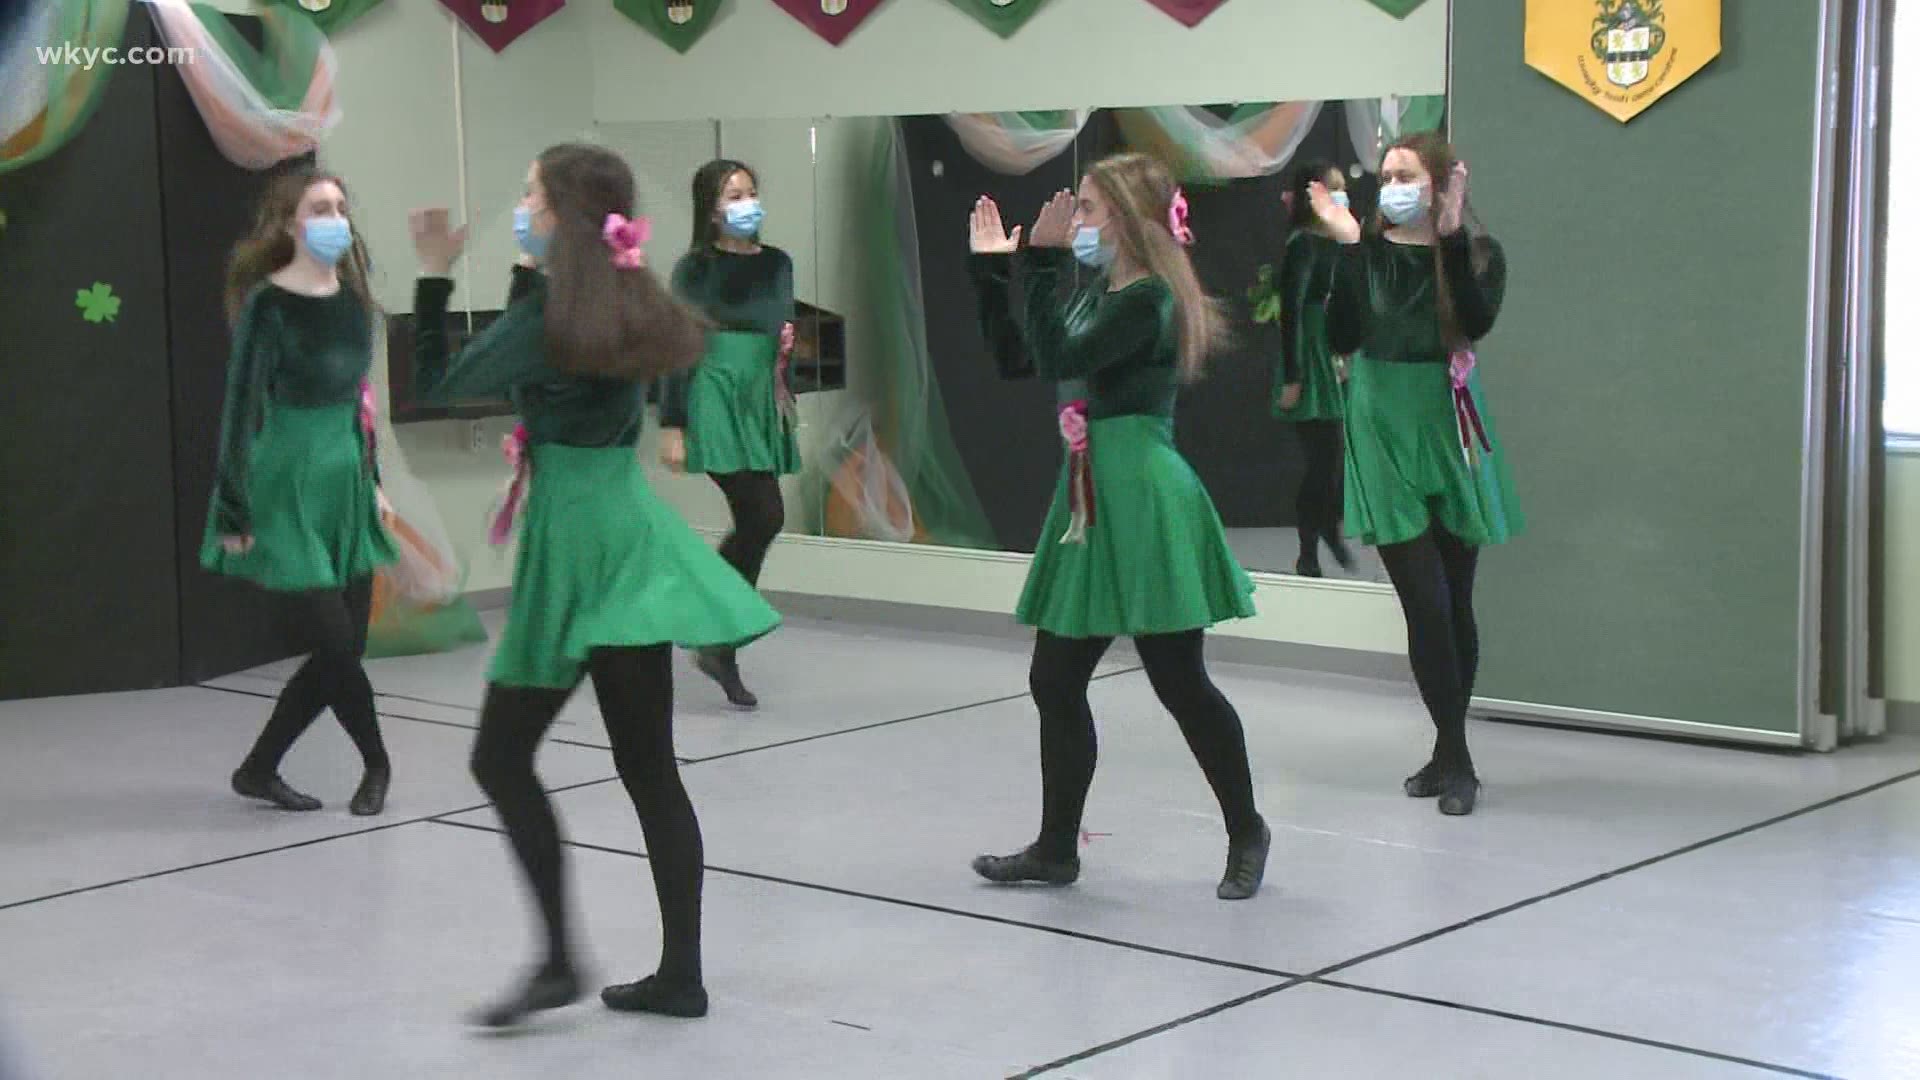 The dancers from Murphy's Irish Art Center have adjusted to the pandemic with virtual performances